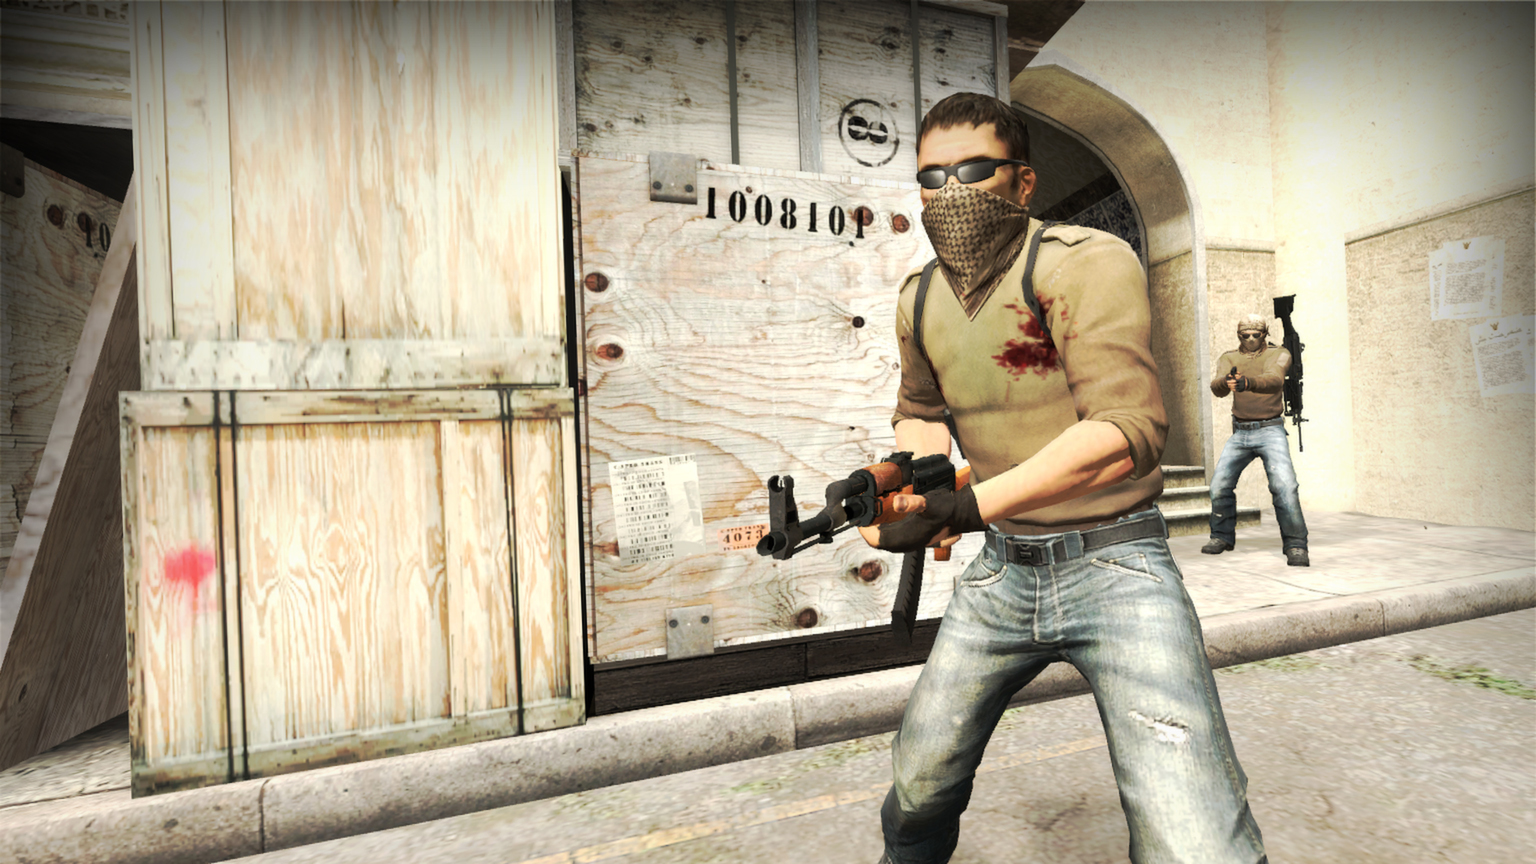 counter strike global offensive release date